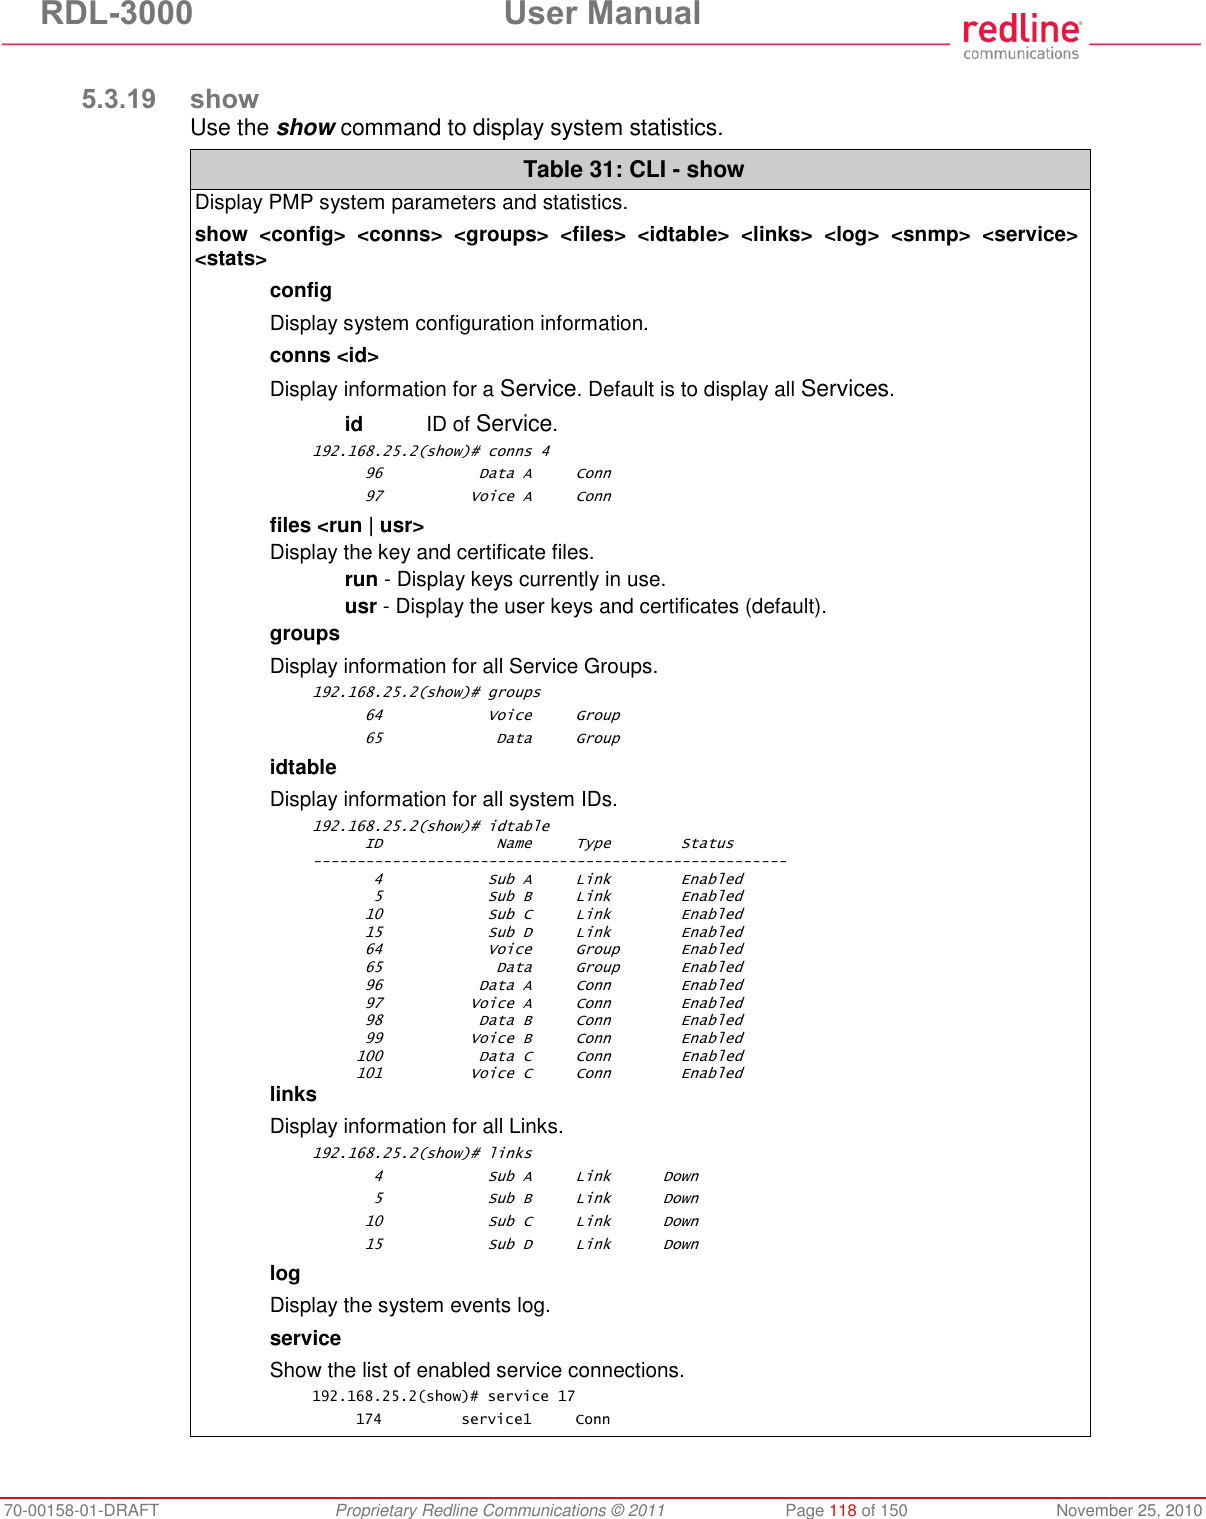 RDL-3000  User Manual 70-00158-01-DRAFT  Proprietary Redline Communications © 2011  Page 118 of 150  November 25, 2010  5.3.19 show Use the show command to display system statistics. Table 31: CLI - show Display PMP system parameters and statistics. show  &lt;config&gt;  &lt;conns&gt;  &lt;groups&gt;  &lt;files&gt;  &lt;idtable&gt;  &lt;links&gt;  &lt;log&gt;  &lt;snmp&gt;  &lt;service&gt; &lt;stats&gt; config Display system configuration information. conns &lt;id&gt; Display information for a Service. Default is to display all Services.  id  ID of Service. 192.168.25.2(show)# conns 4       96           Data A     Conn       97          Voice A     Conn files &lt;run | usr&gt; Display the key and certificate files.  run - Display keys currently in use.  usr - Display the user keys and certificates (default). groups Display information for all Service Groups. 192.168.25.2(show)# groups       64            Voice     Group       65             Data     Group idtable Display information for all system IDs. 192.168.25.2(show)# idtable       ID             Name     Type        Status ------------------------------------------------------        4            Sub A     Link        Enabled        5            Sub B     Link        Enabled       10            Sub C     Link        Enabled       15            Sub D     Link        Enabled       64            Voice     Group       Enabled       65             Data     Group       Enabled       96           Data A     Conn        Enabled       97          Voice A     Conn        Enabled       98           Data B     Conn        Enabled       99          Voice B     Conn        Enabled      100           Data C     Conn        Enabled      101          Voice C     Conn        Enabled links Display information for all Links. 192.168.25.2(show)# links        4            Sub A     Link      Down        5            Sub B     Link      Down       10            Sub C     Link      Down       15            Sub D     Link      Down  log Display the system events log. service Show the list of enabled service connections. 192.168.25.2(show)# service 17      174         service1     Conn 